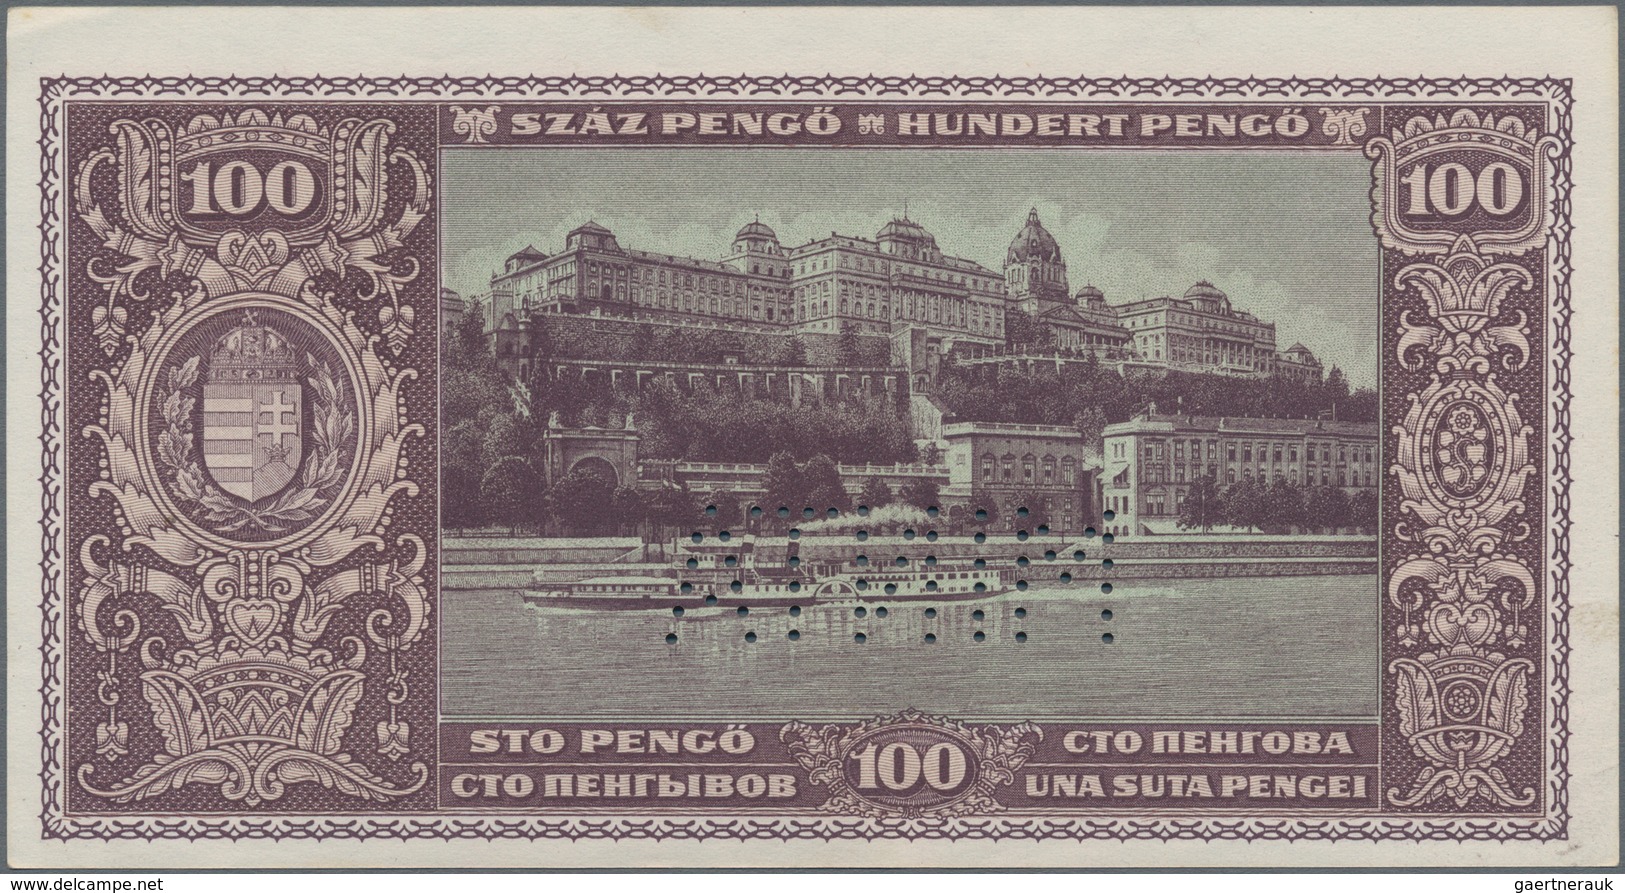 Hungary / Ungarn: Set with 7 banknotes series 1920 – 1946, all SPECIMEN with perforation "Minta" and